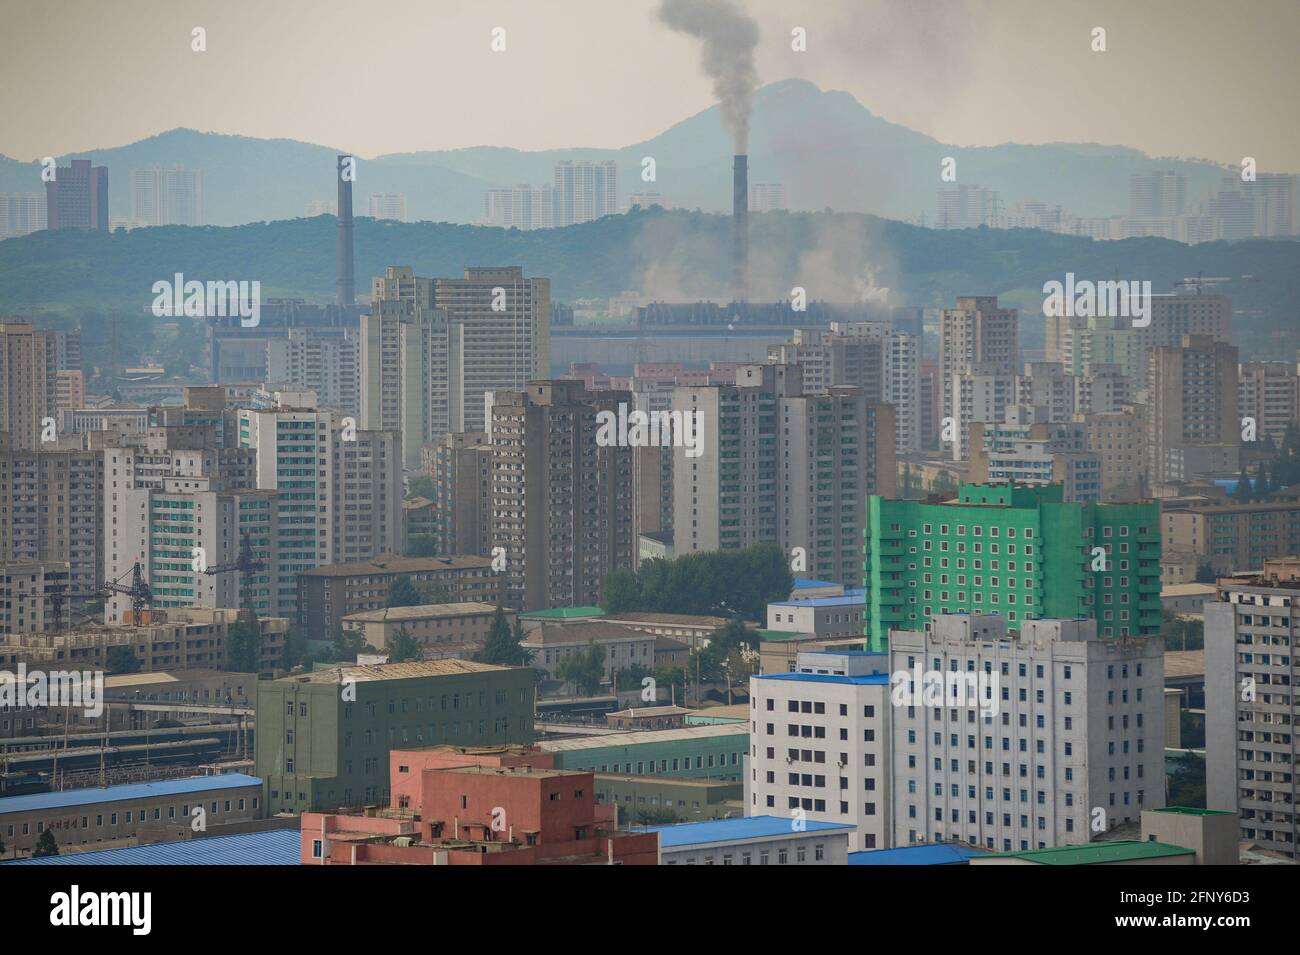 09.08.2012, Pyongyang, North Korea, Asia - Elevated cityscape shows smoking chimneys and a significant air pollution with smog over buildings. Stock Photo